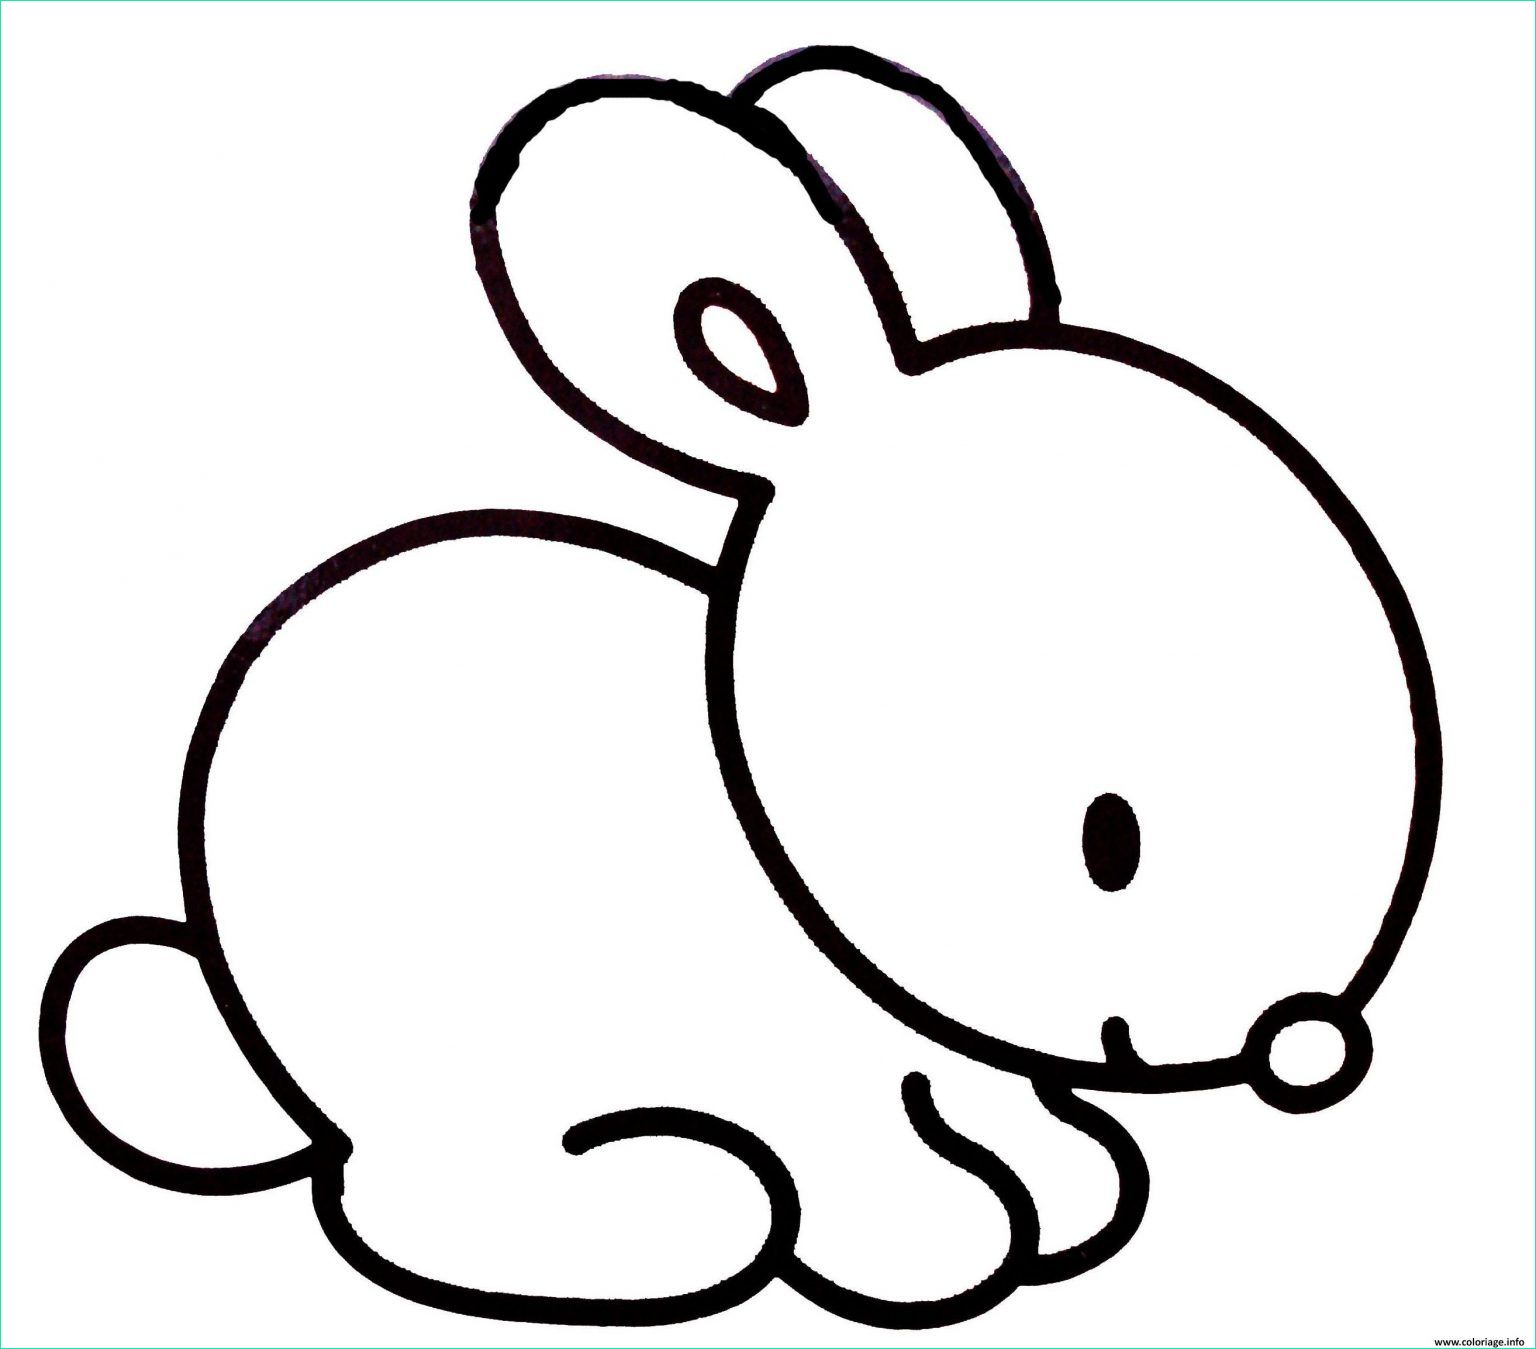 Coloriage Lapin Facile Beau Collection Lapin Dessin Simple Cool Graphie Coloriage Lapin